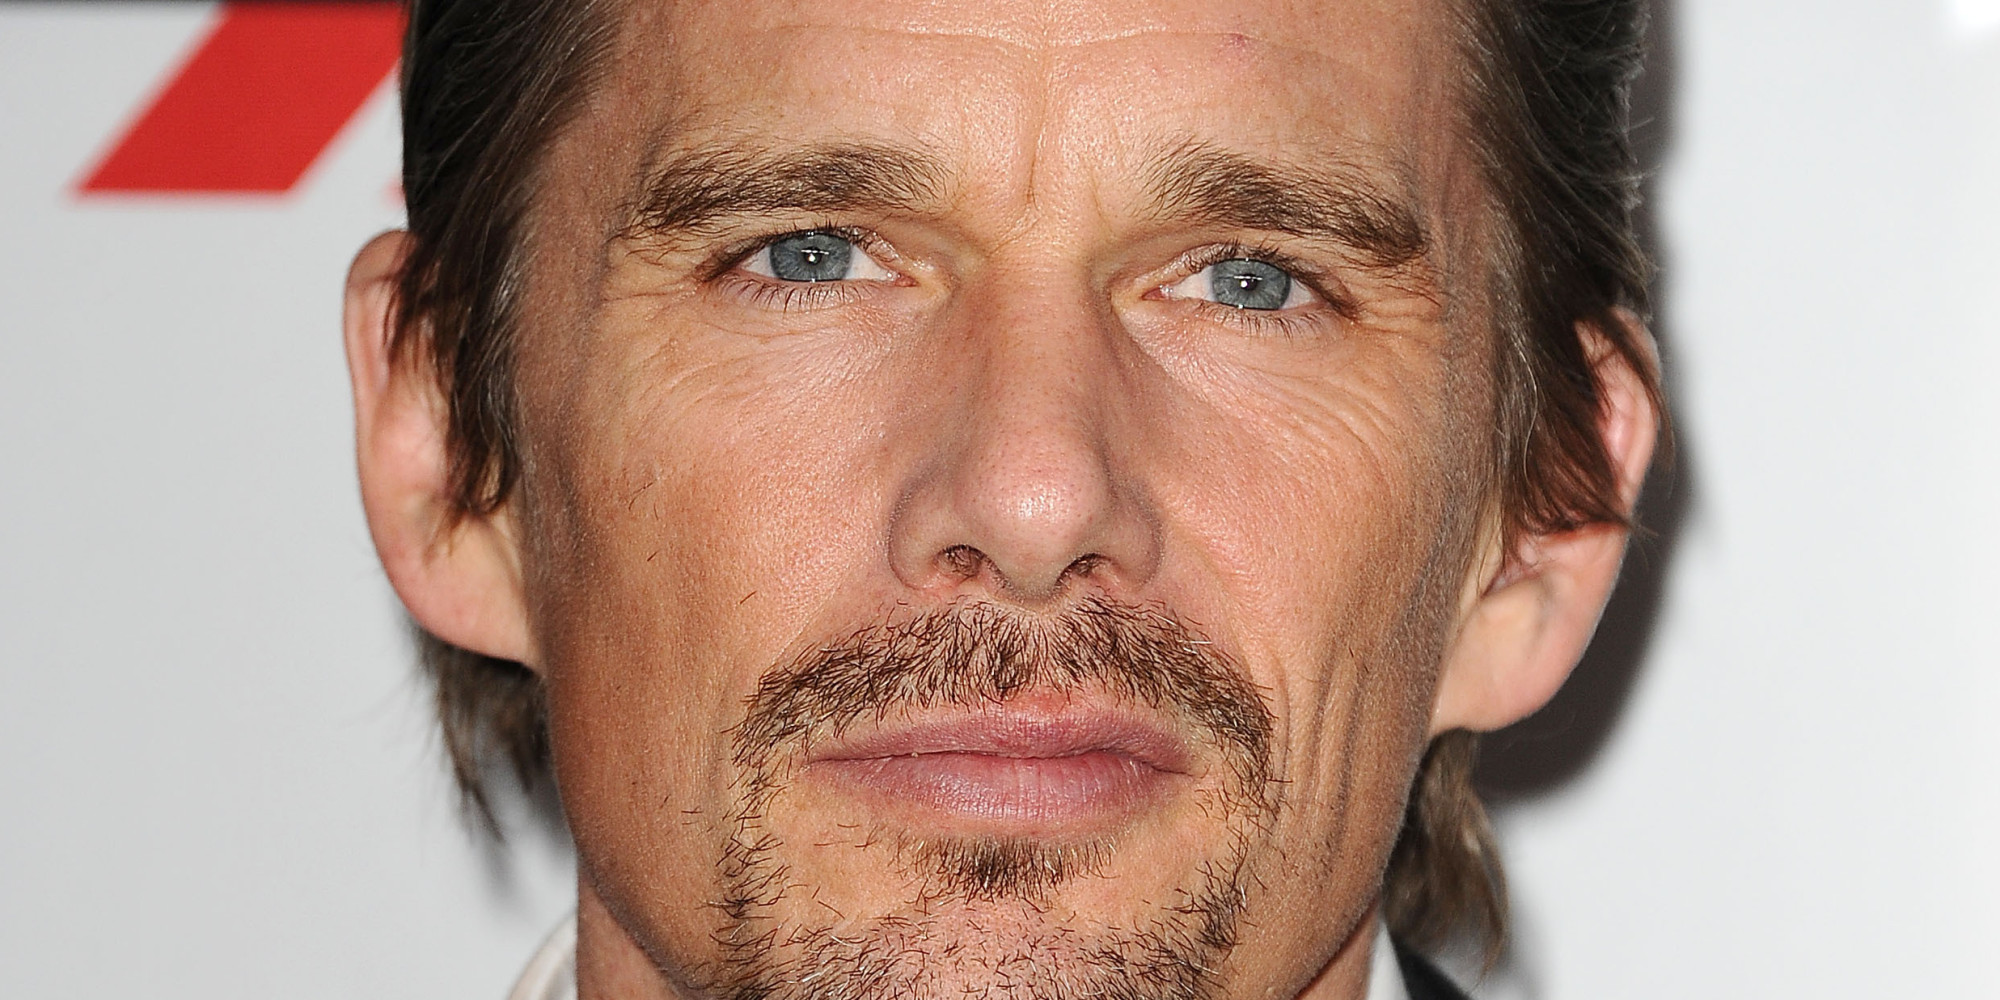 Amazing Ethan Hawke Pictures & Backgrounds